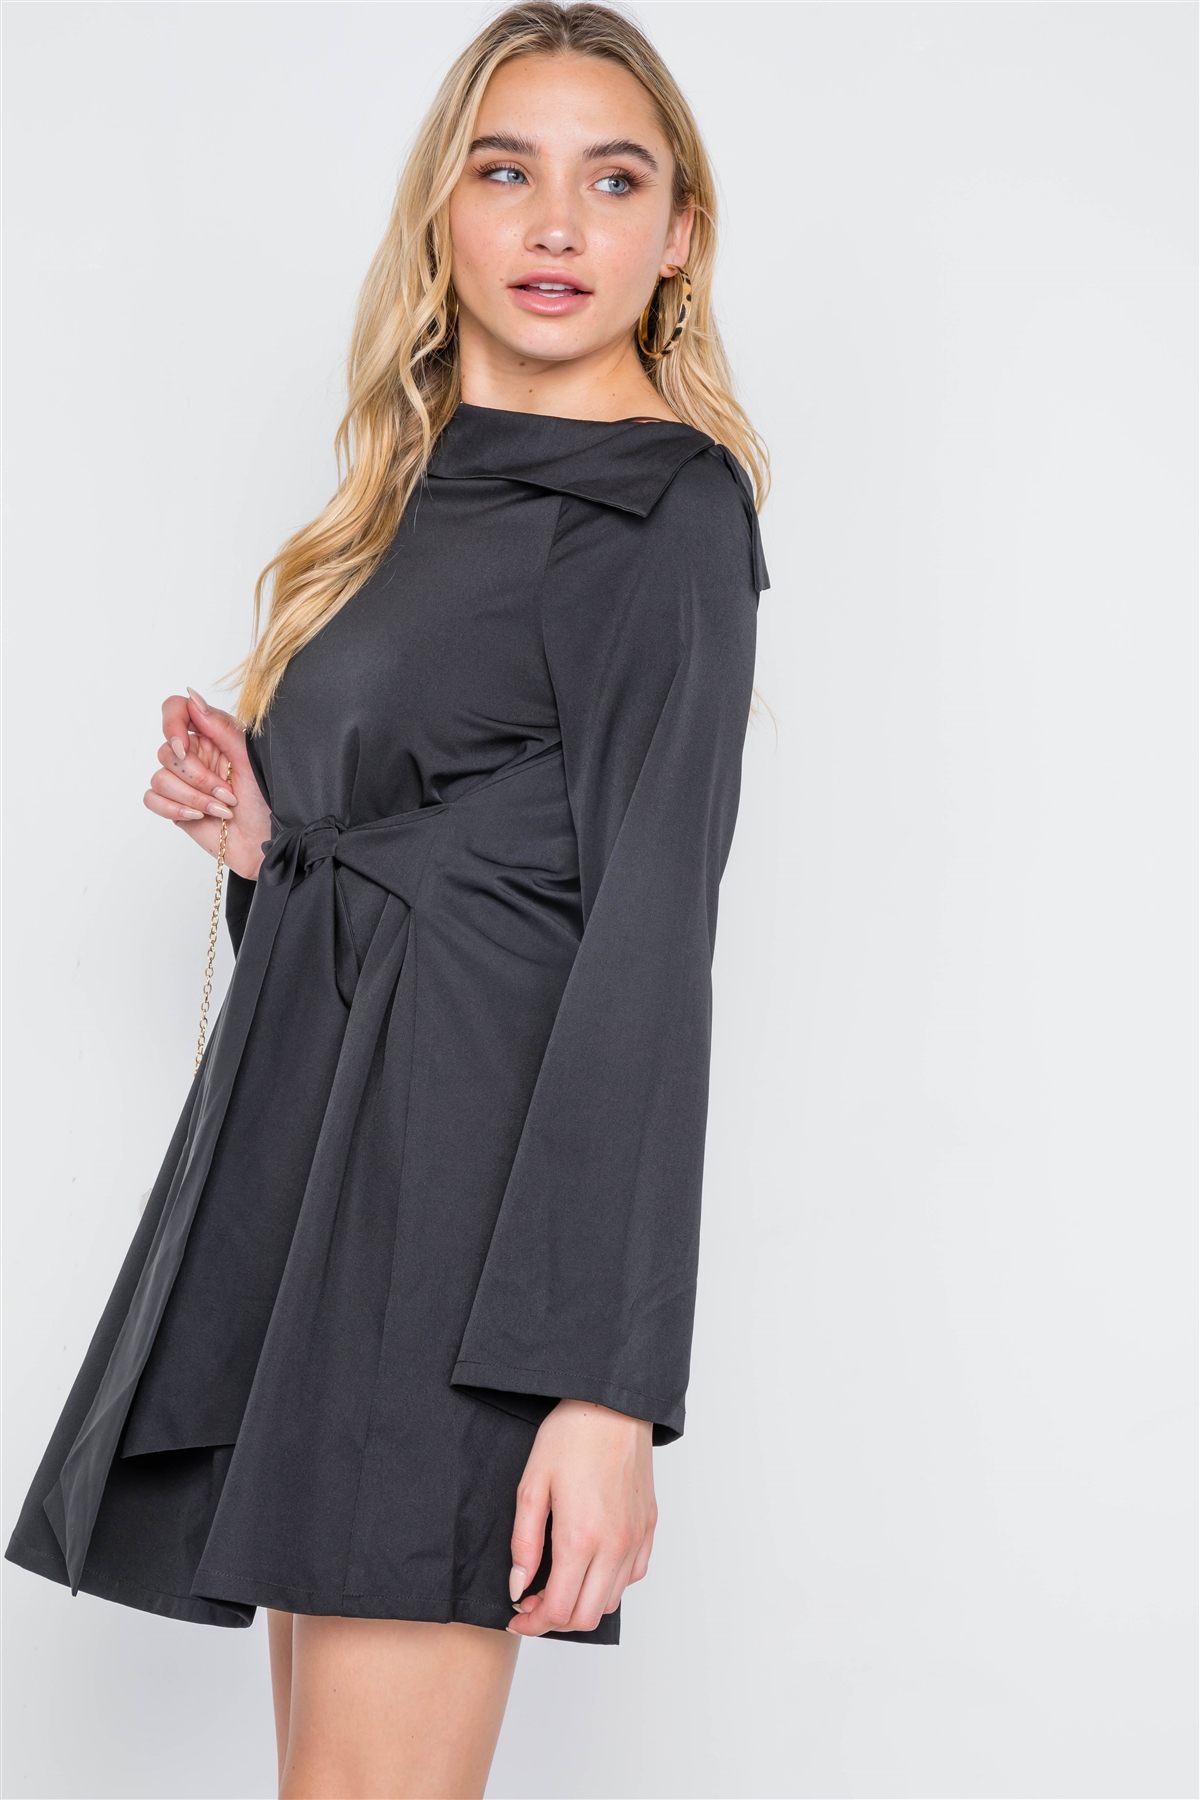 Straight Neck Solid Front-tie Dress Straight Neck Solid Front-tie Dress - M&R CORNER M&R CORNER Black / S